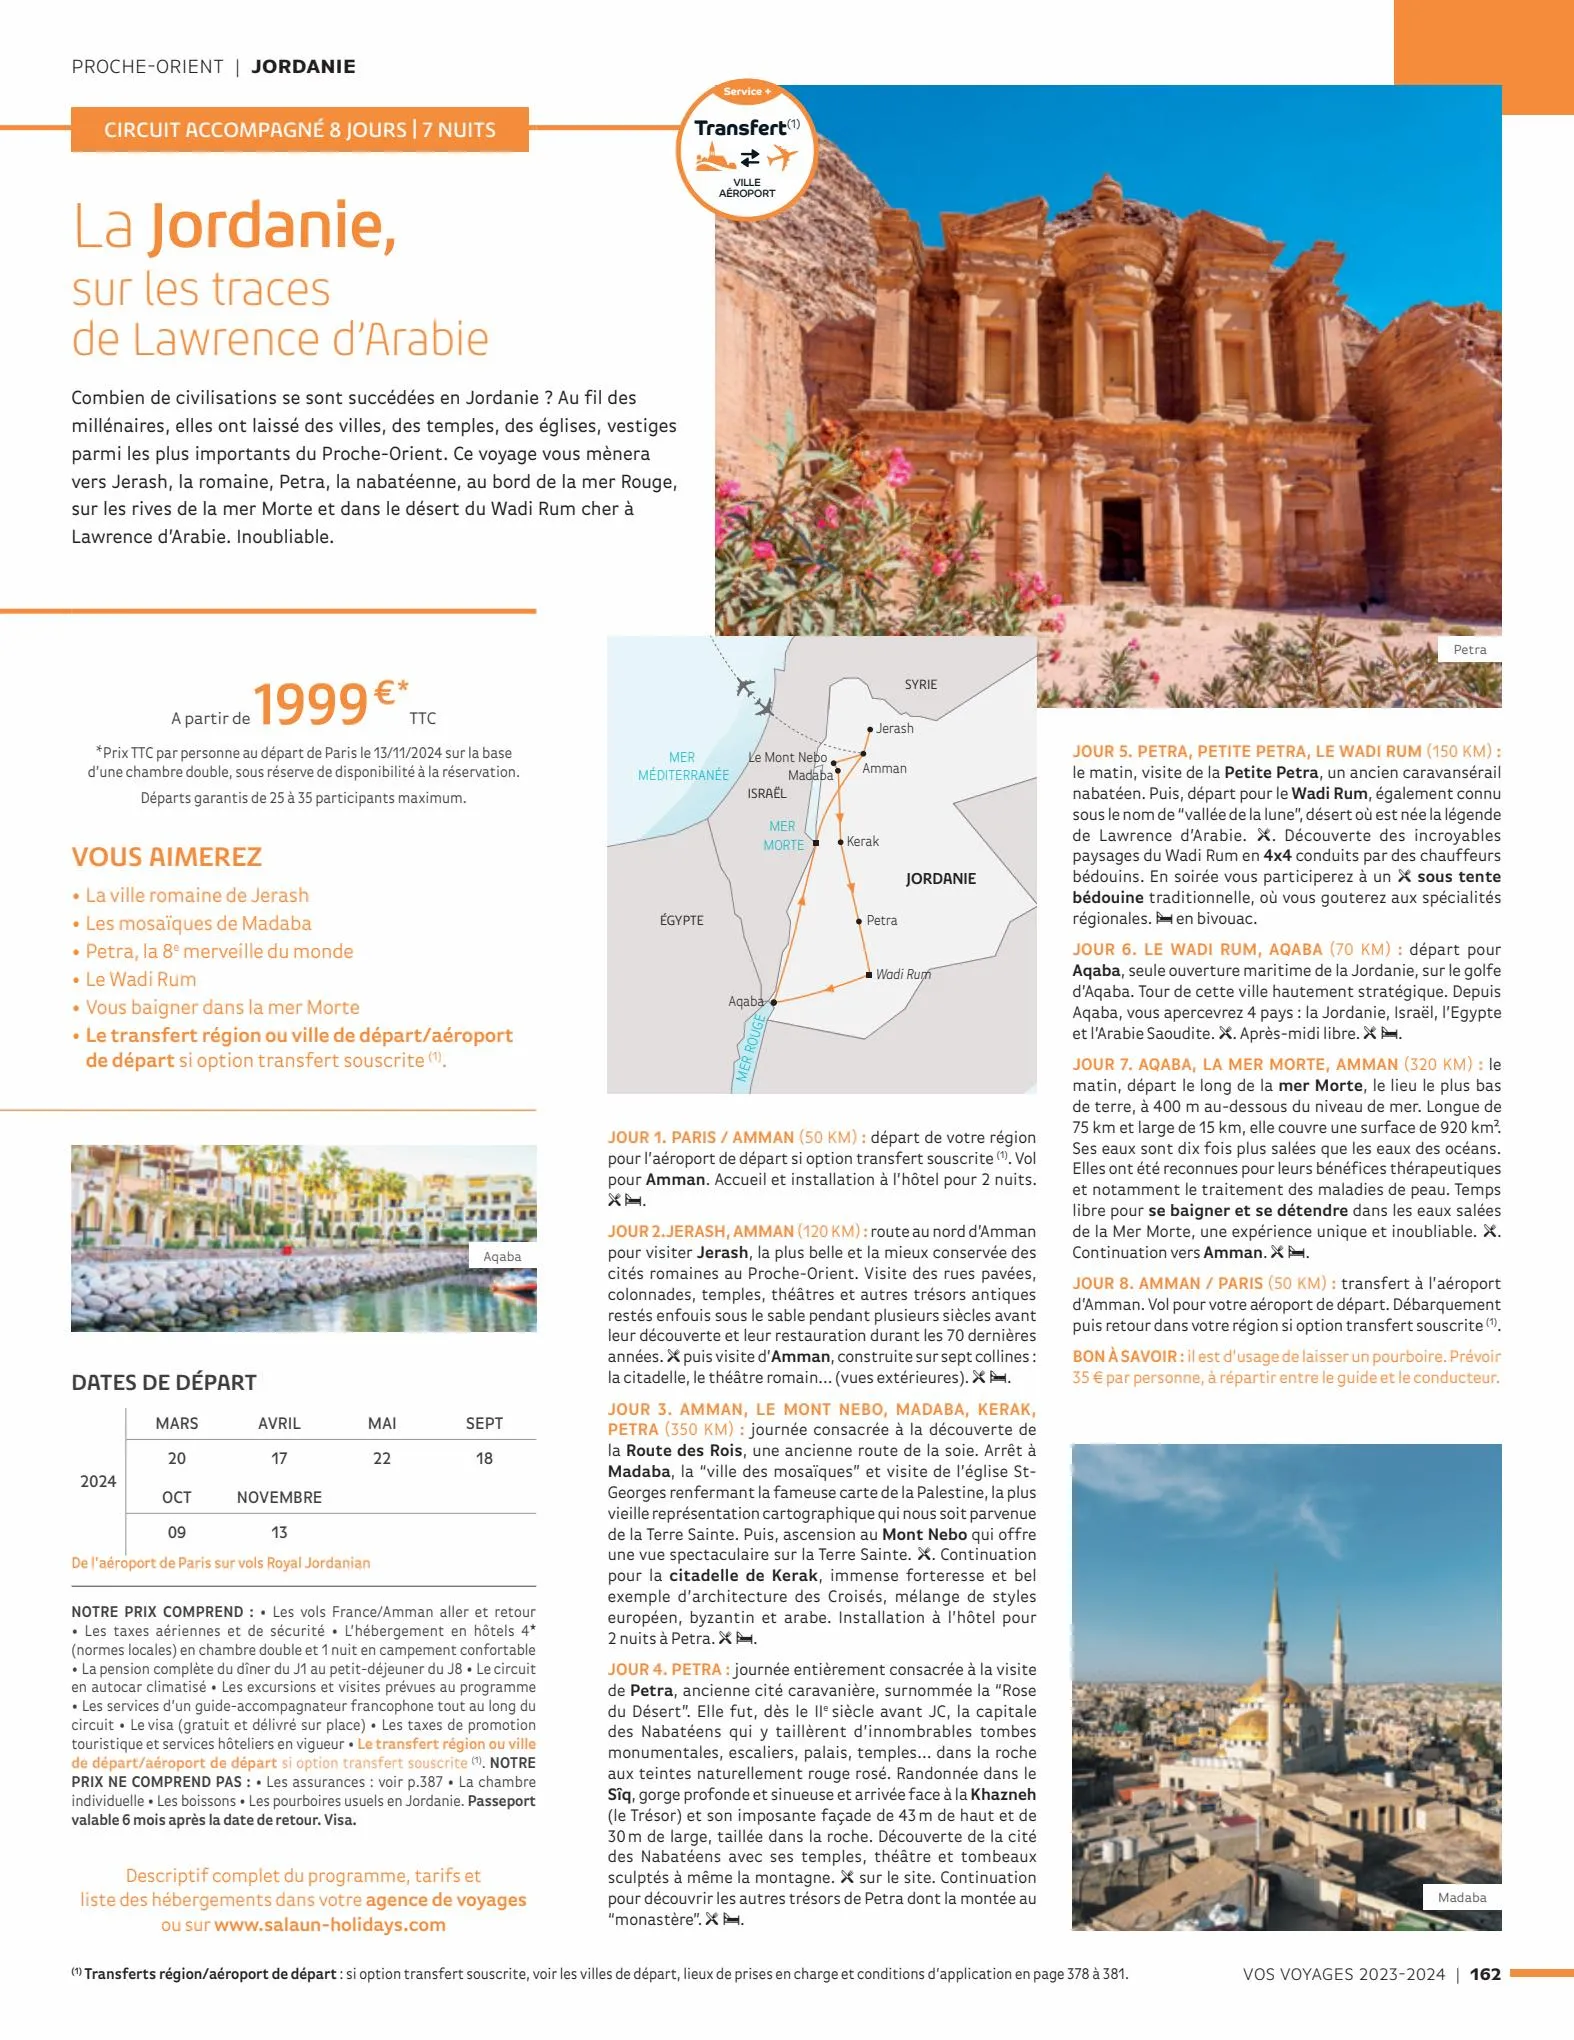 Catalogue Vos voyages 2023-2024, page 00162